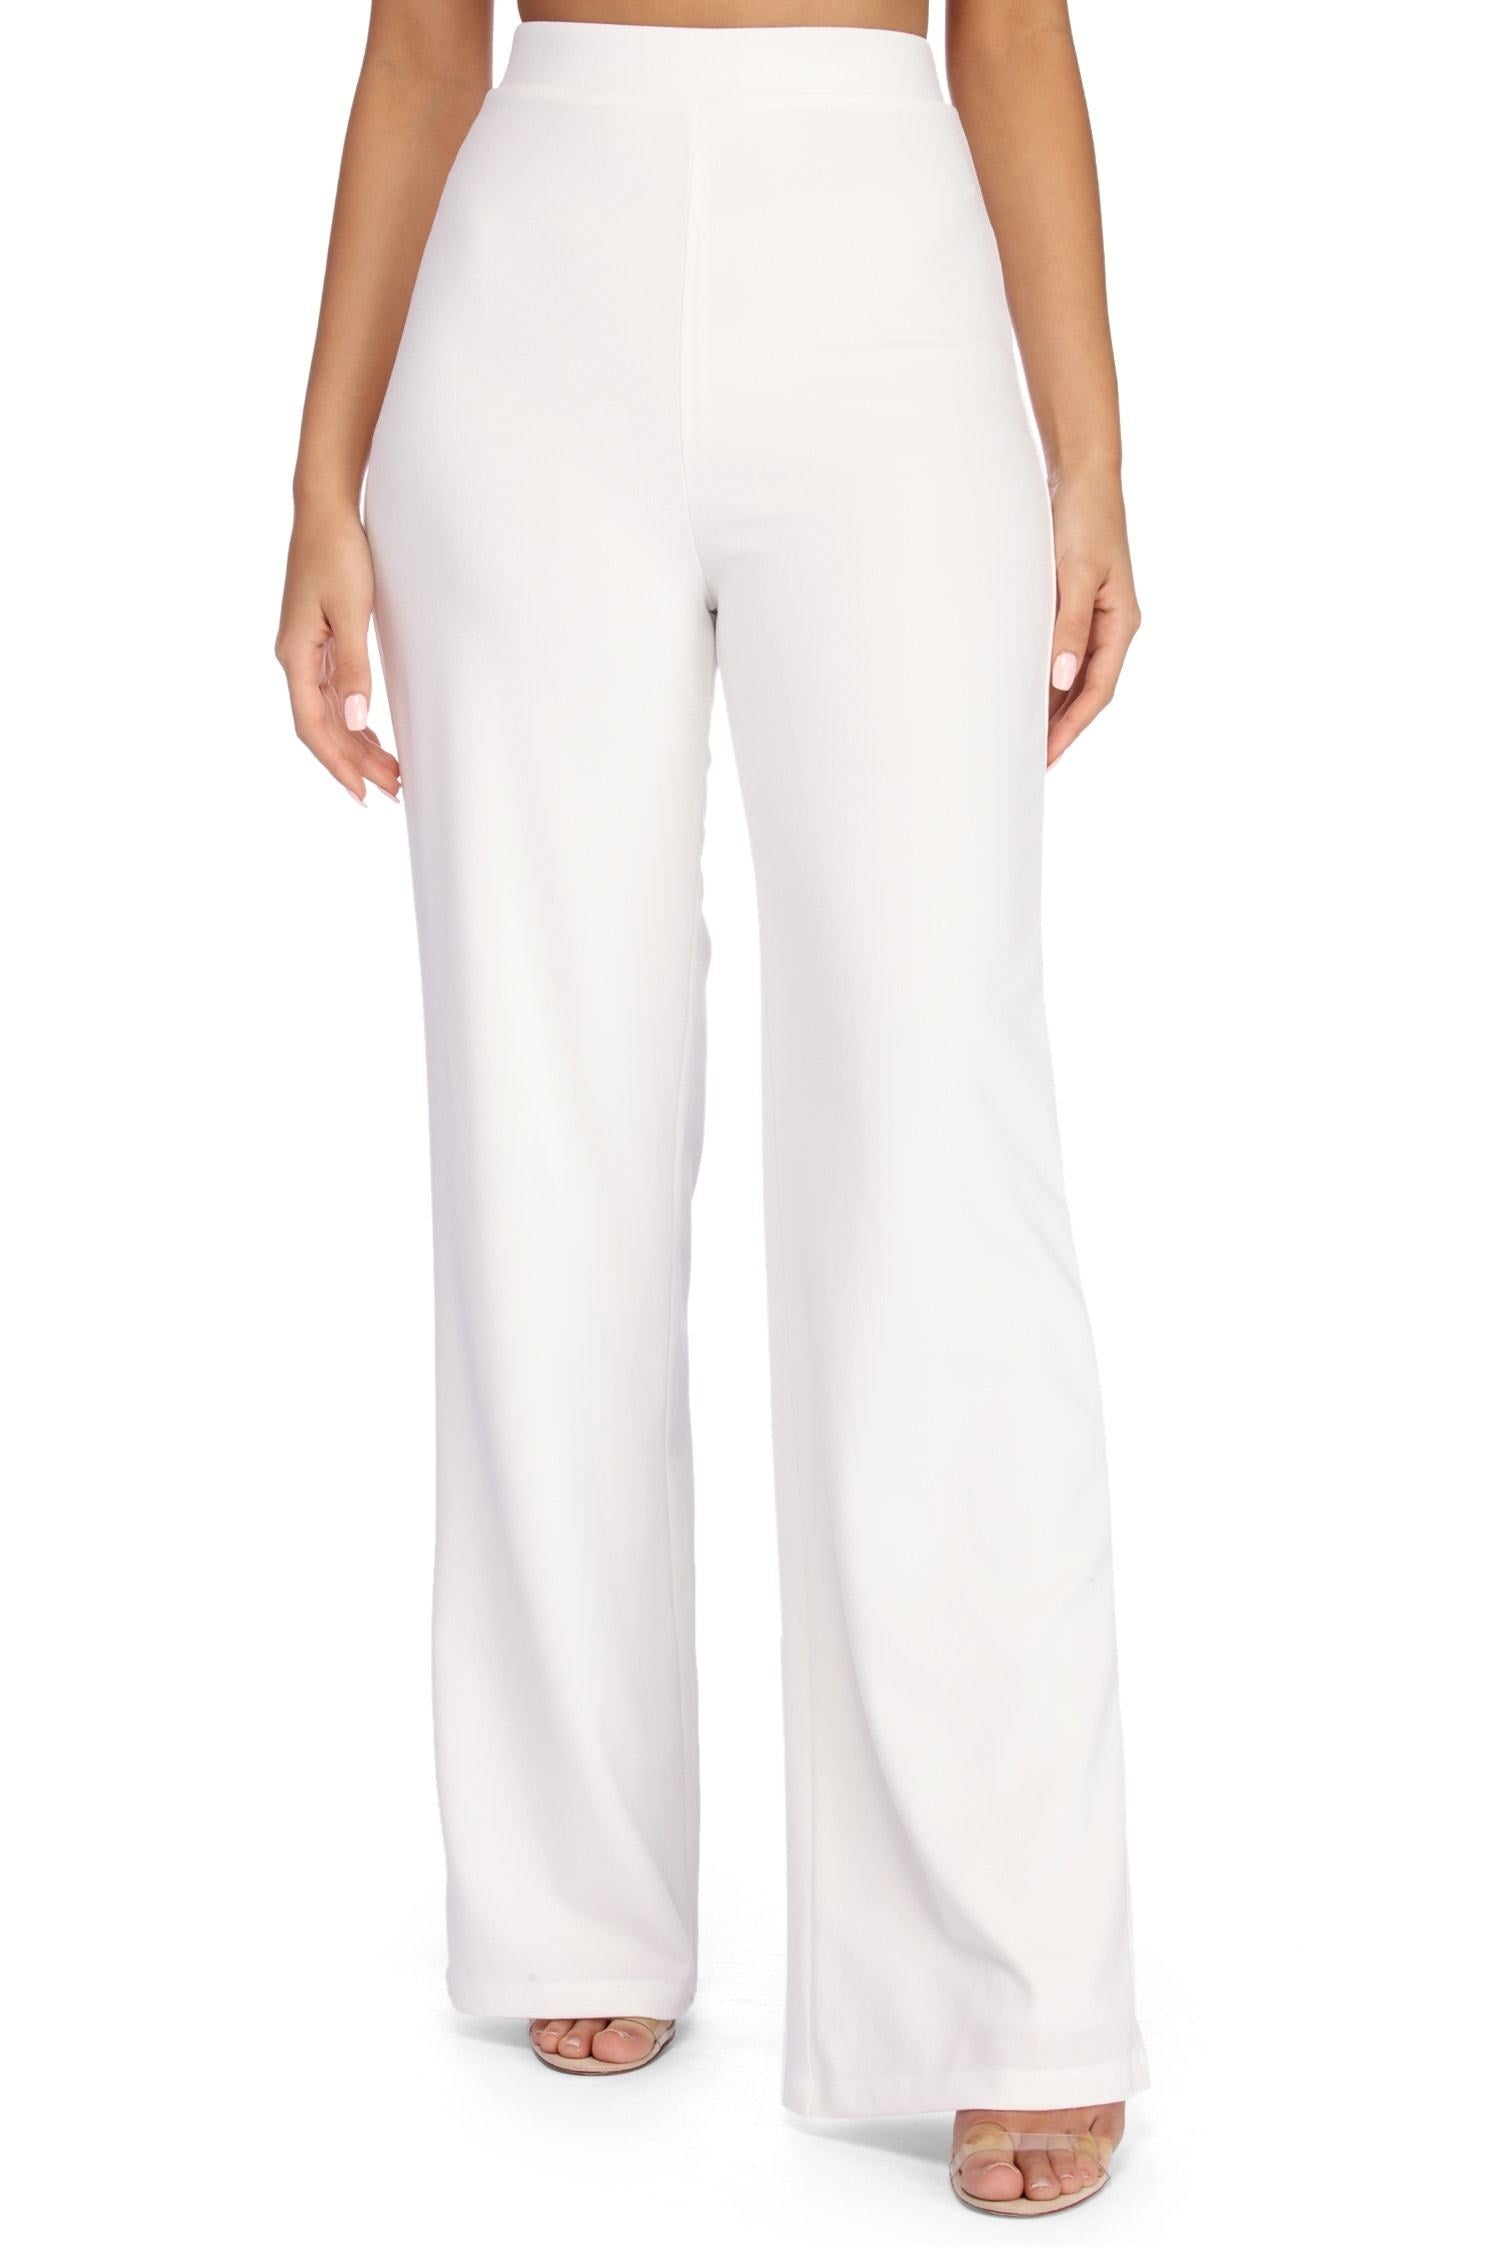 Such A Romantic High Waist Pants - Lady Occasions